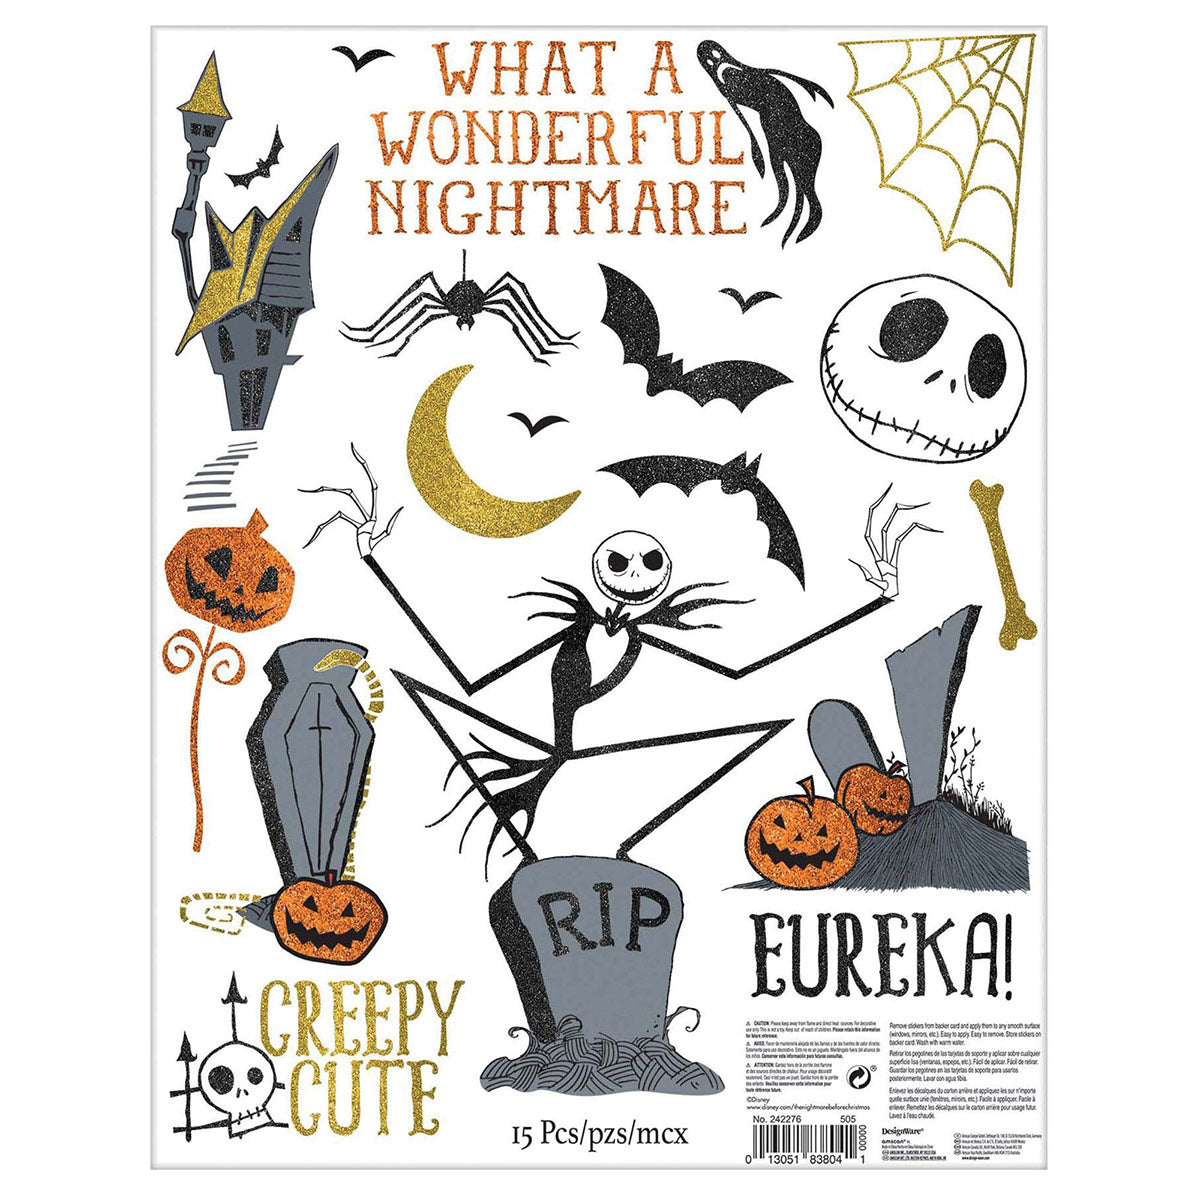 AMSCAN CA Halloween The Nightmare Before Christmas Vinyl Window Decorations with Glitter 013051838041